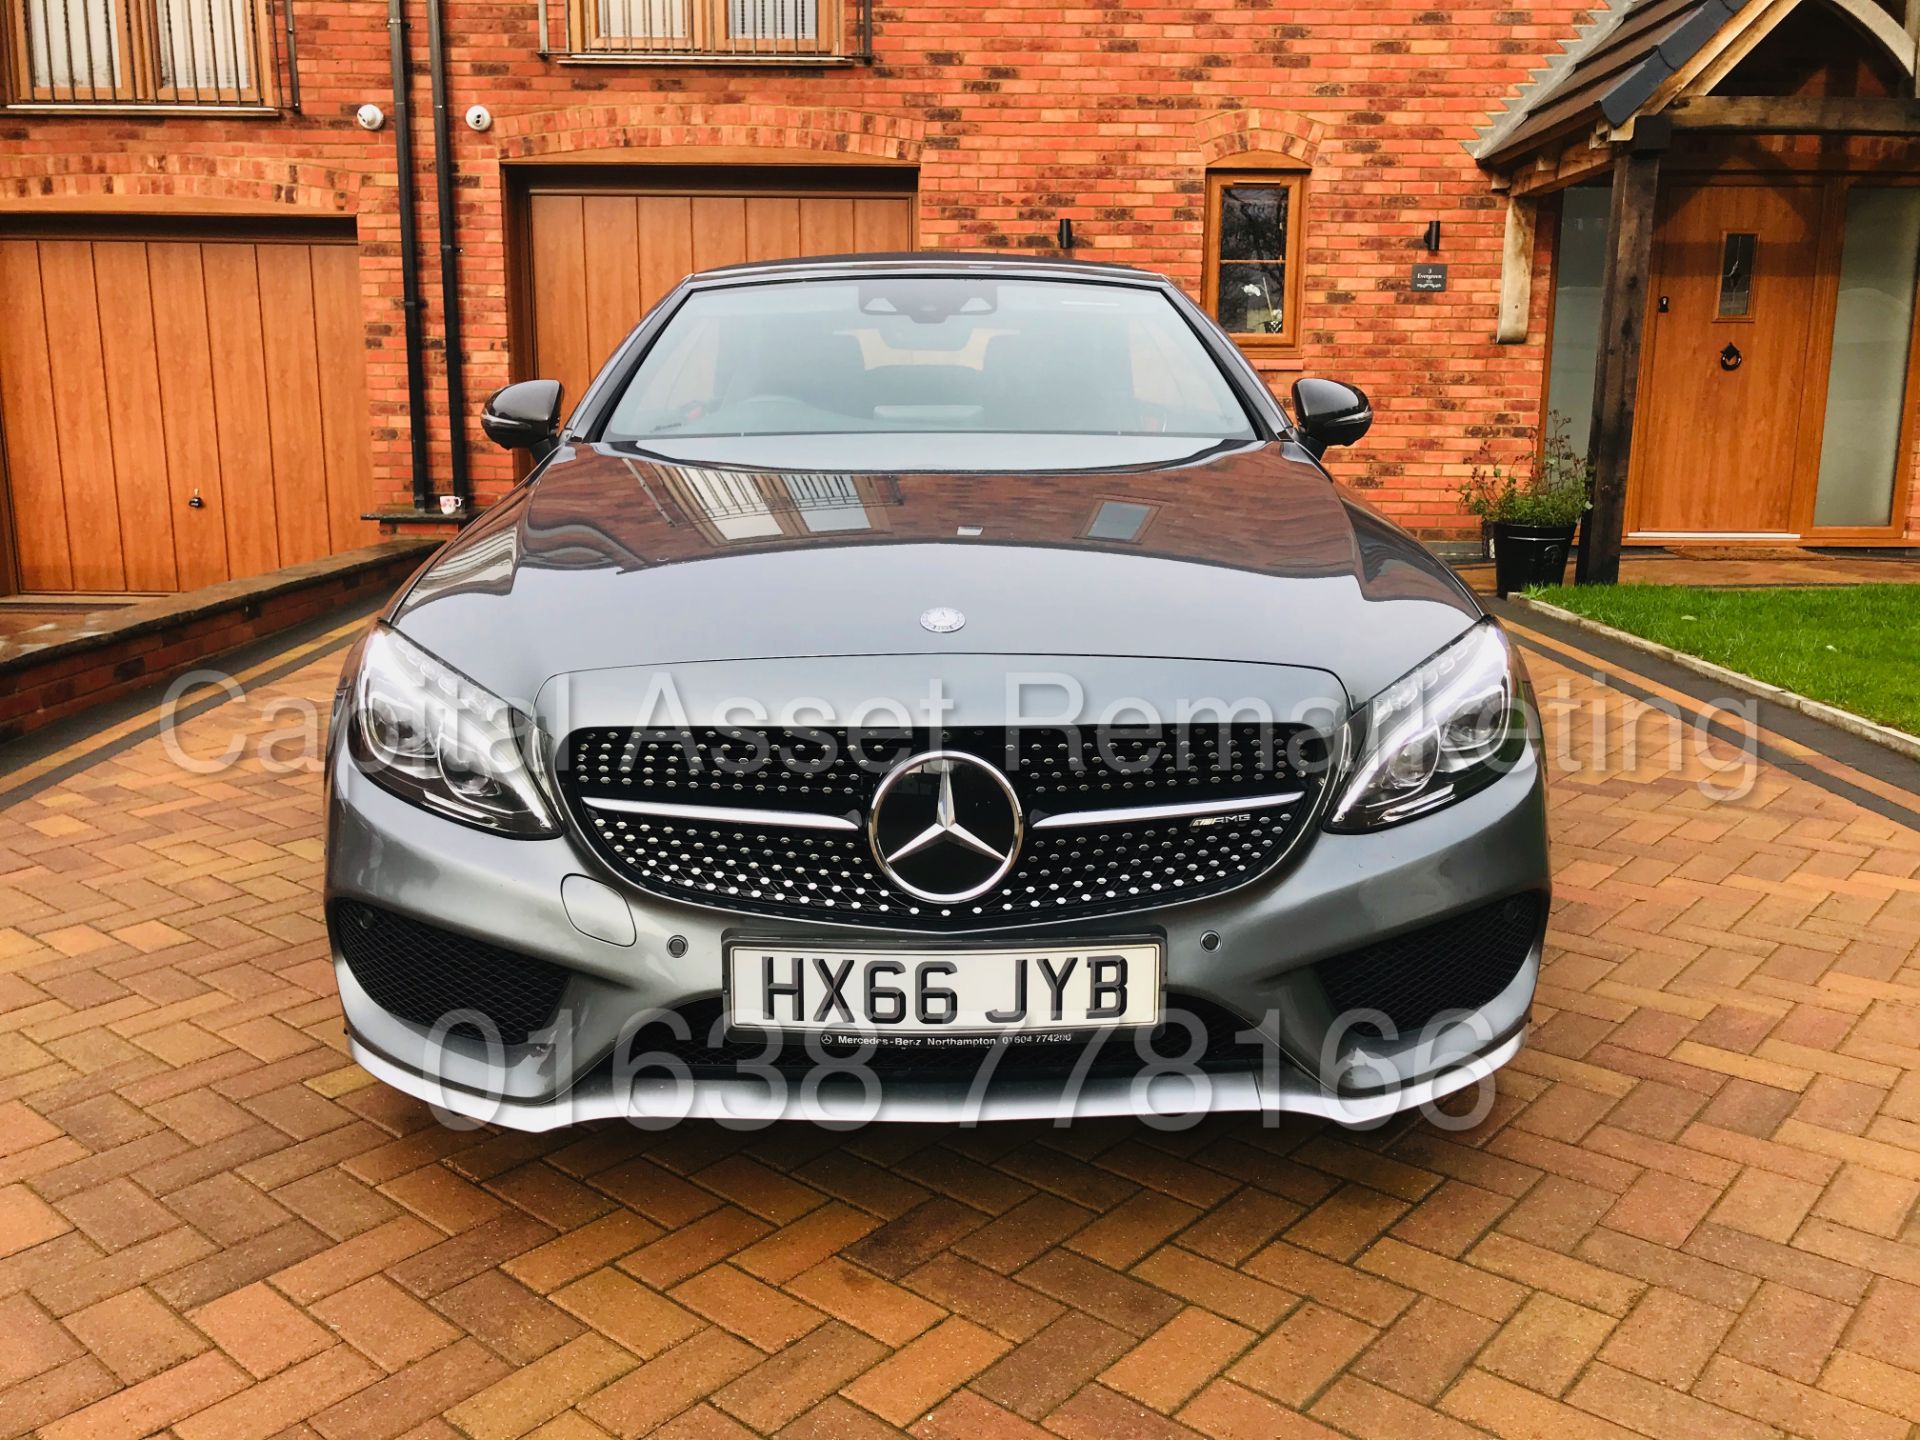 ON SALE MERCEDES-BENZ C43 *AMG BI-TURBO* CABRIOLET (2017) '3.0 V6 - 367 BHP - 4 MATIC - 9 SPEED AUTO - Image 9 of 59